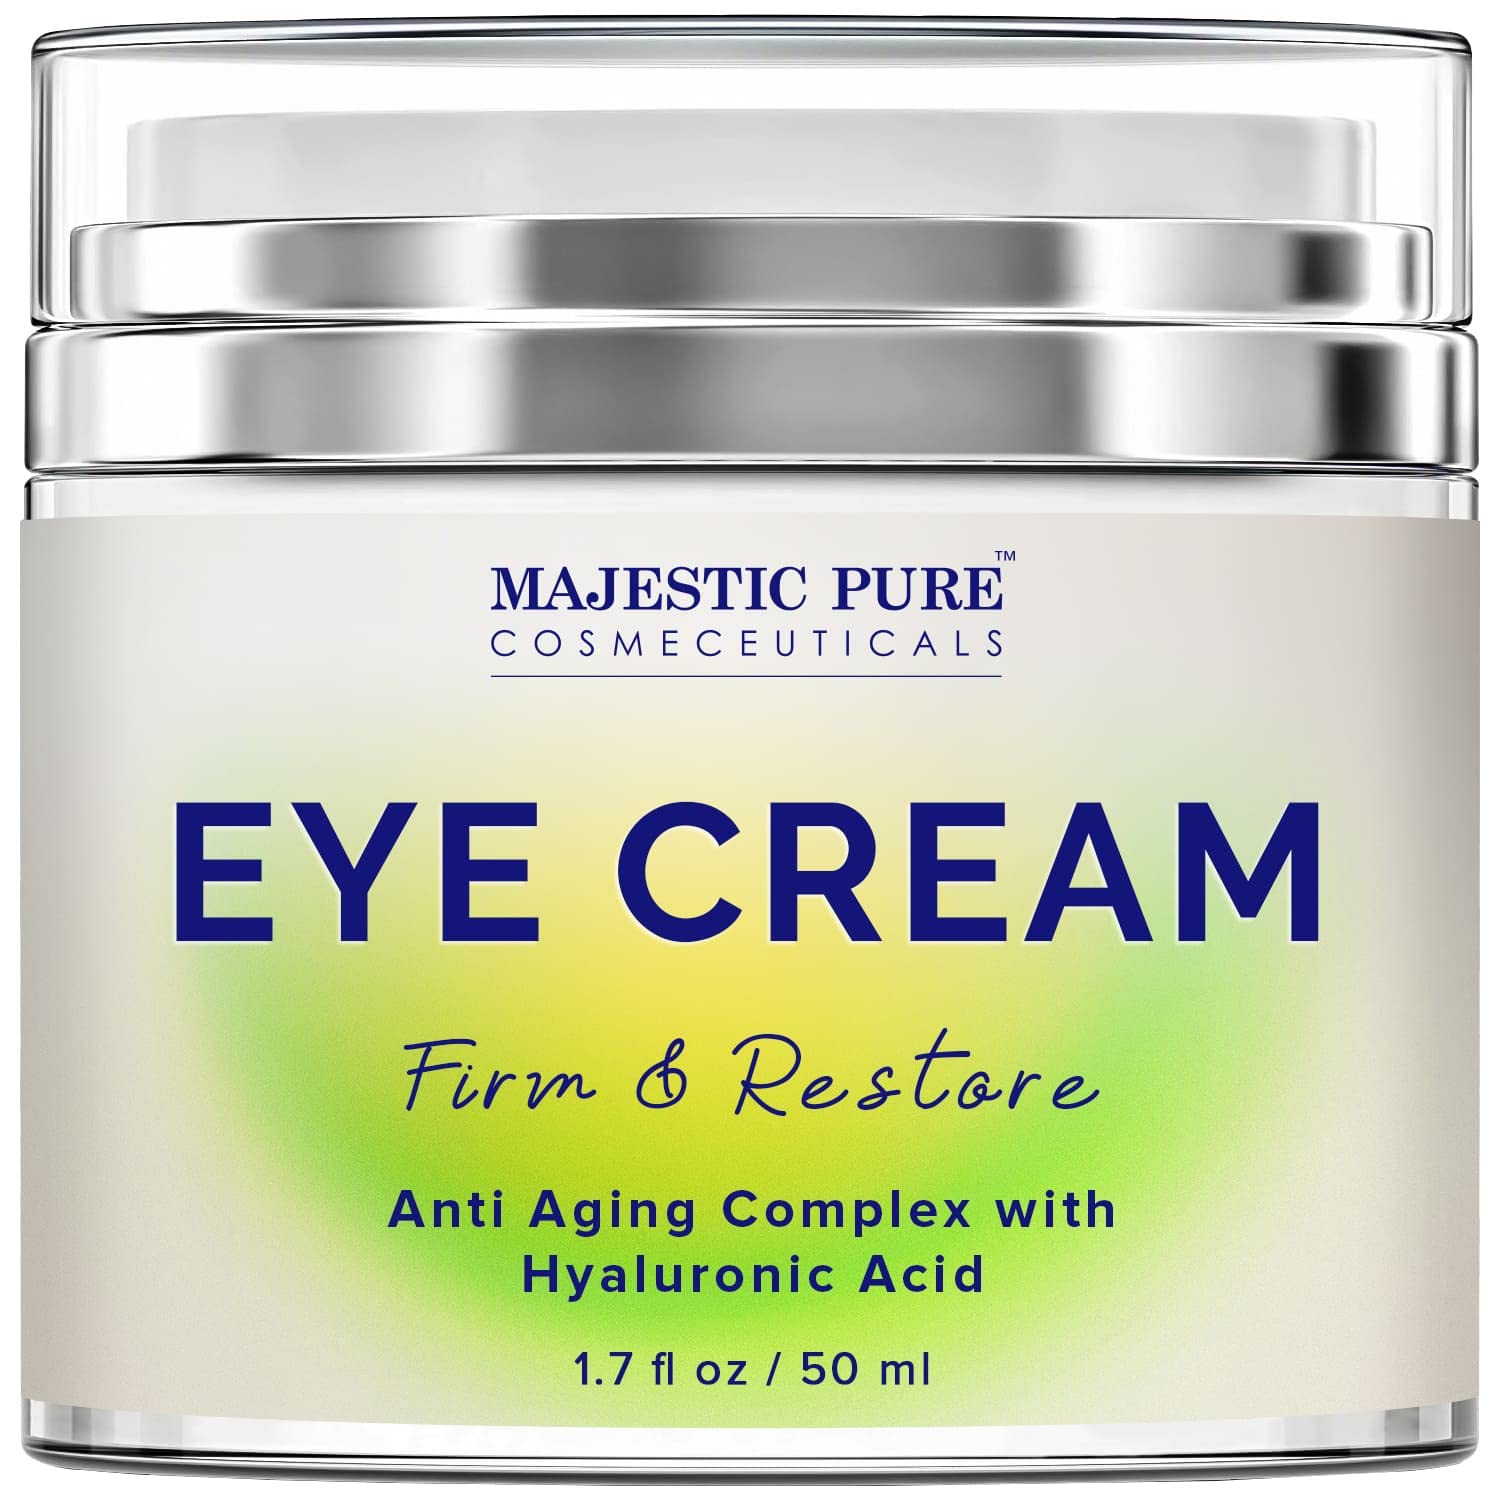 MAJESTIC PURE Under Eye Cream with Hyaluronic Acid - Anti Aging & Firming - Reduces Appearance of Dark Circles, Puffiness, Eye Bags & Crow’s Feet - Youthful & Bright Appearance - Men and Women - 50ml